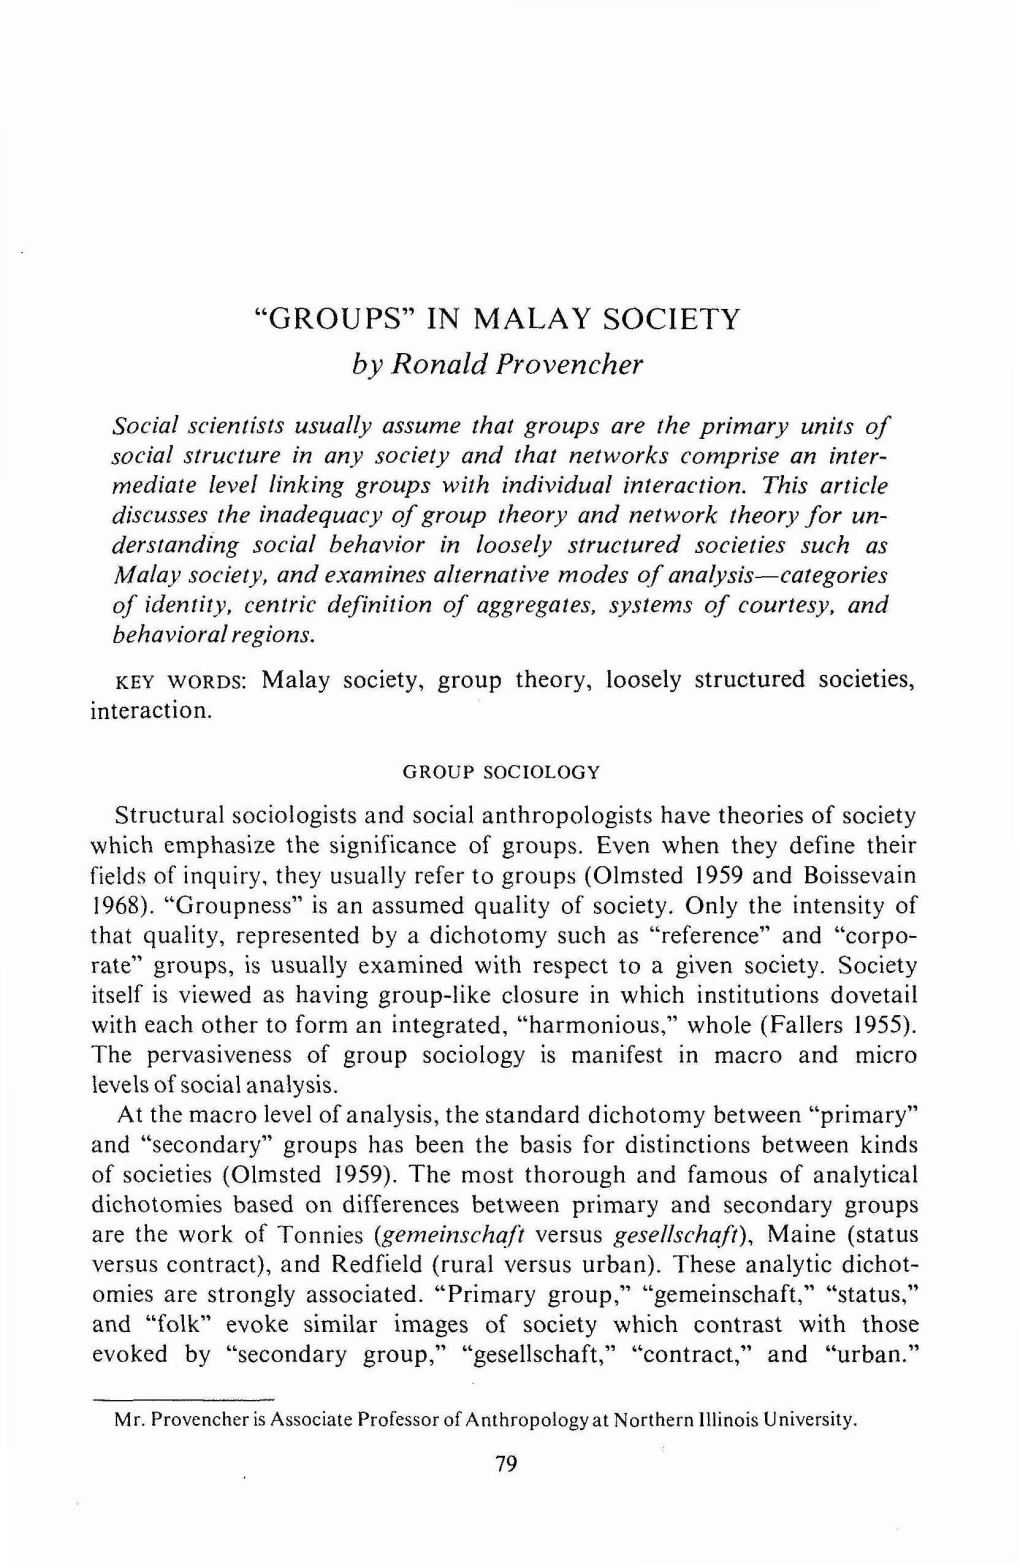 "GROUPS" in MALAY SOCIETY by Ronald Provencher